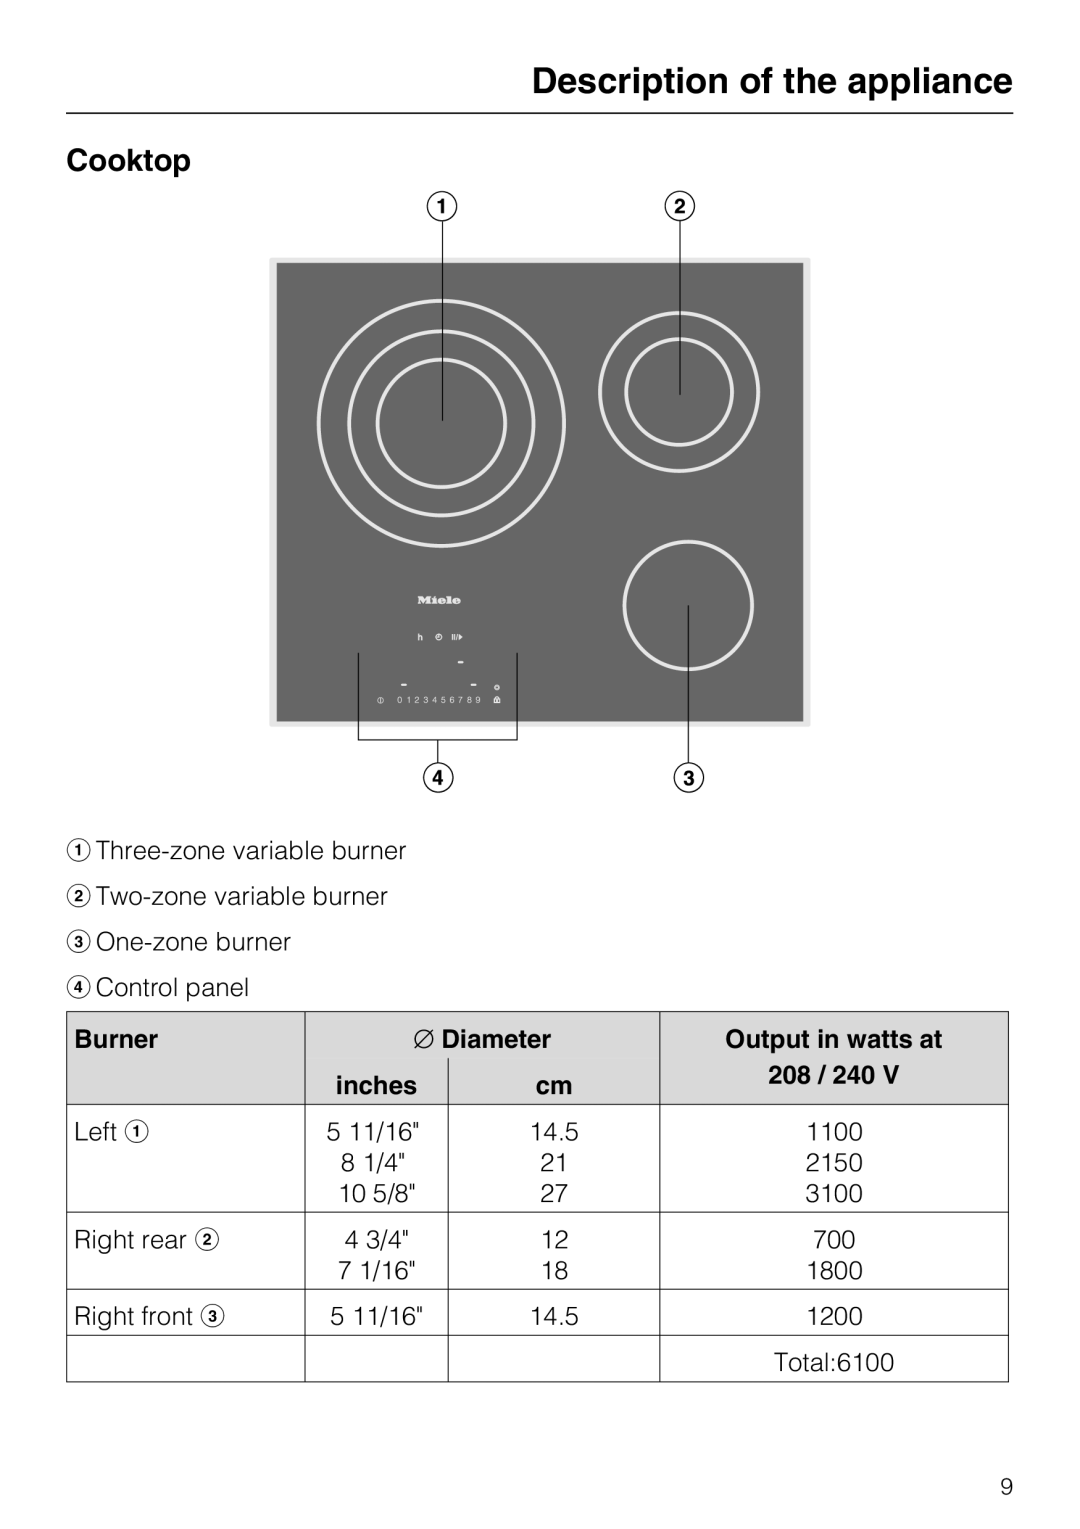 Miele KM 5820 installation instructions Description of the appliance, Cooktop 